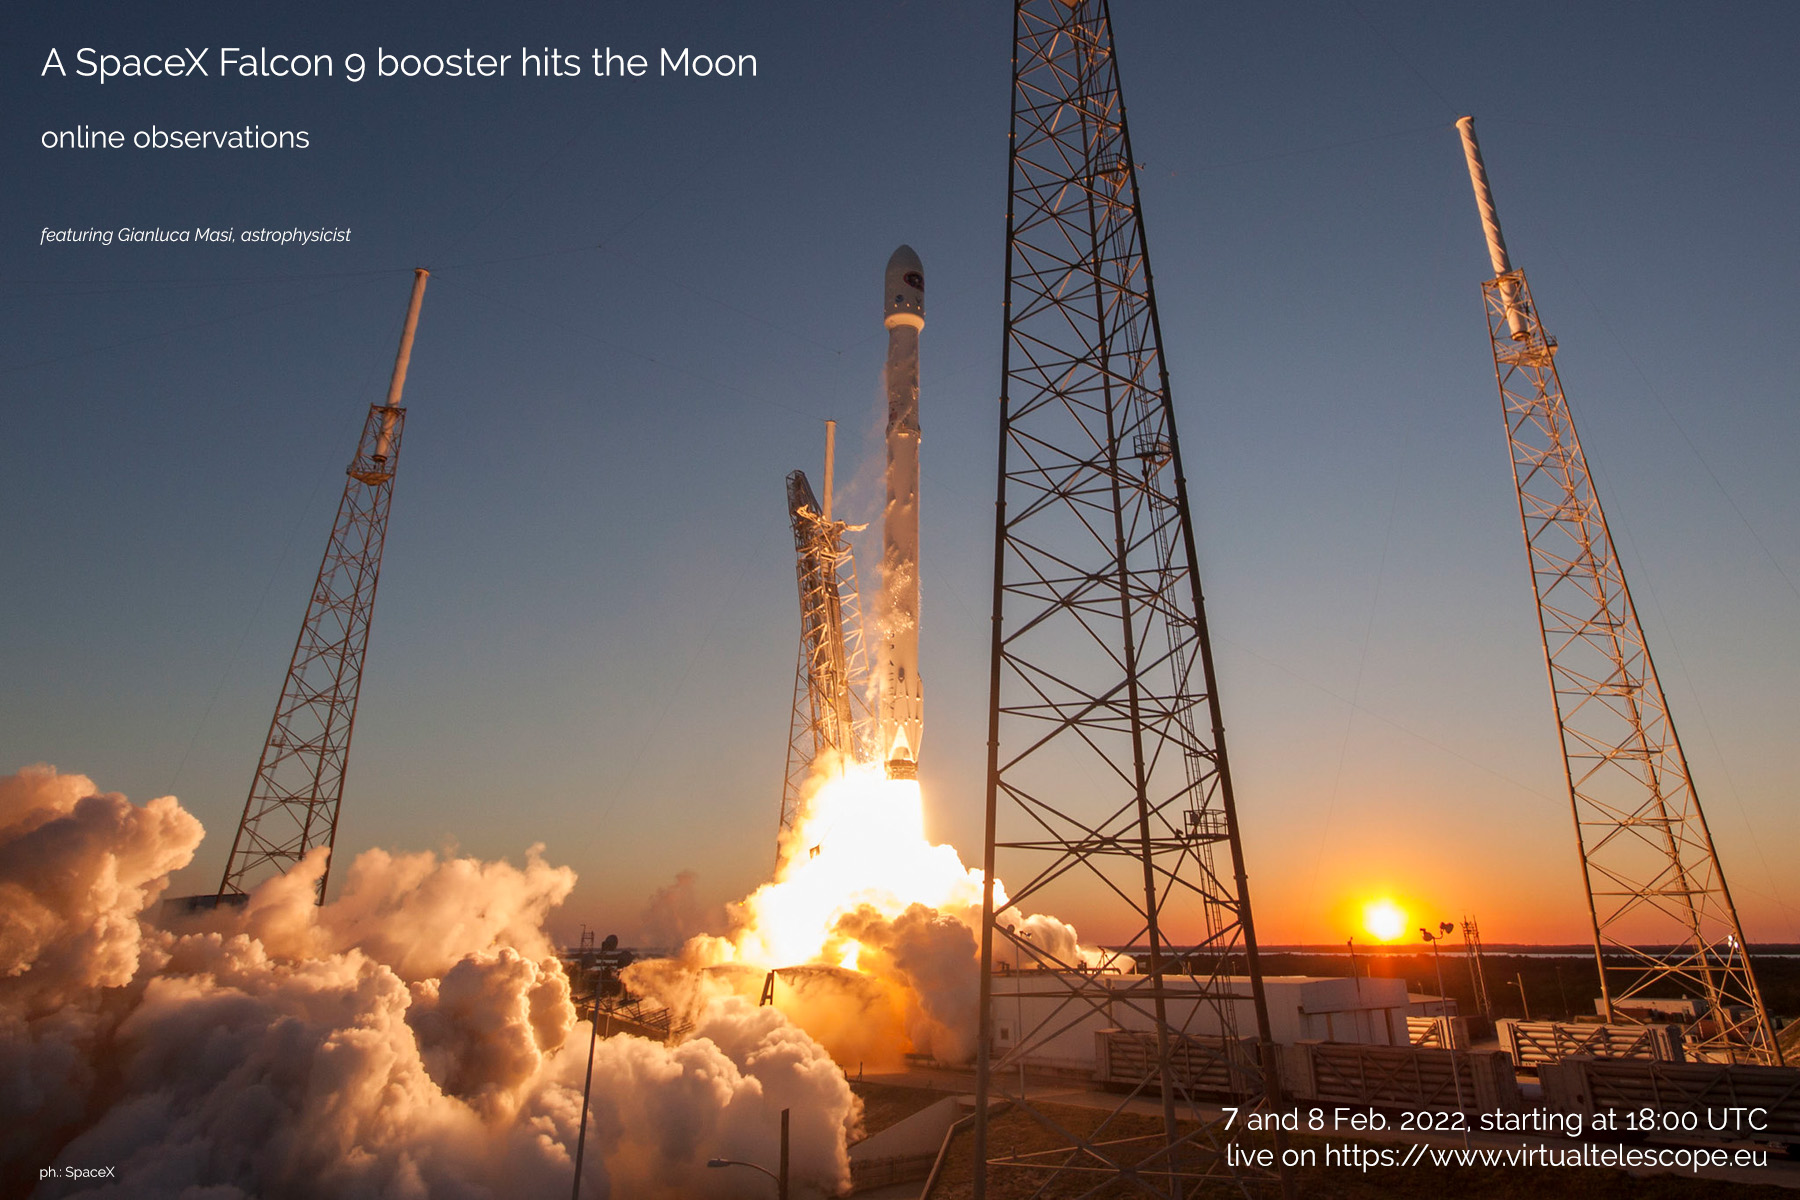 Space X Deep Space Climate Observatory (DSCOVR)’s booster impacts the Moon: online observations - 7 and 8 Feb. 2022.